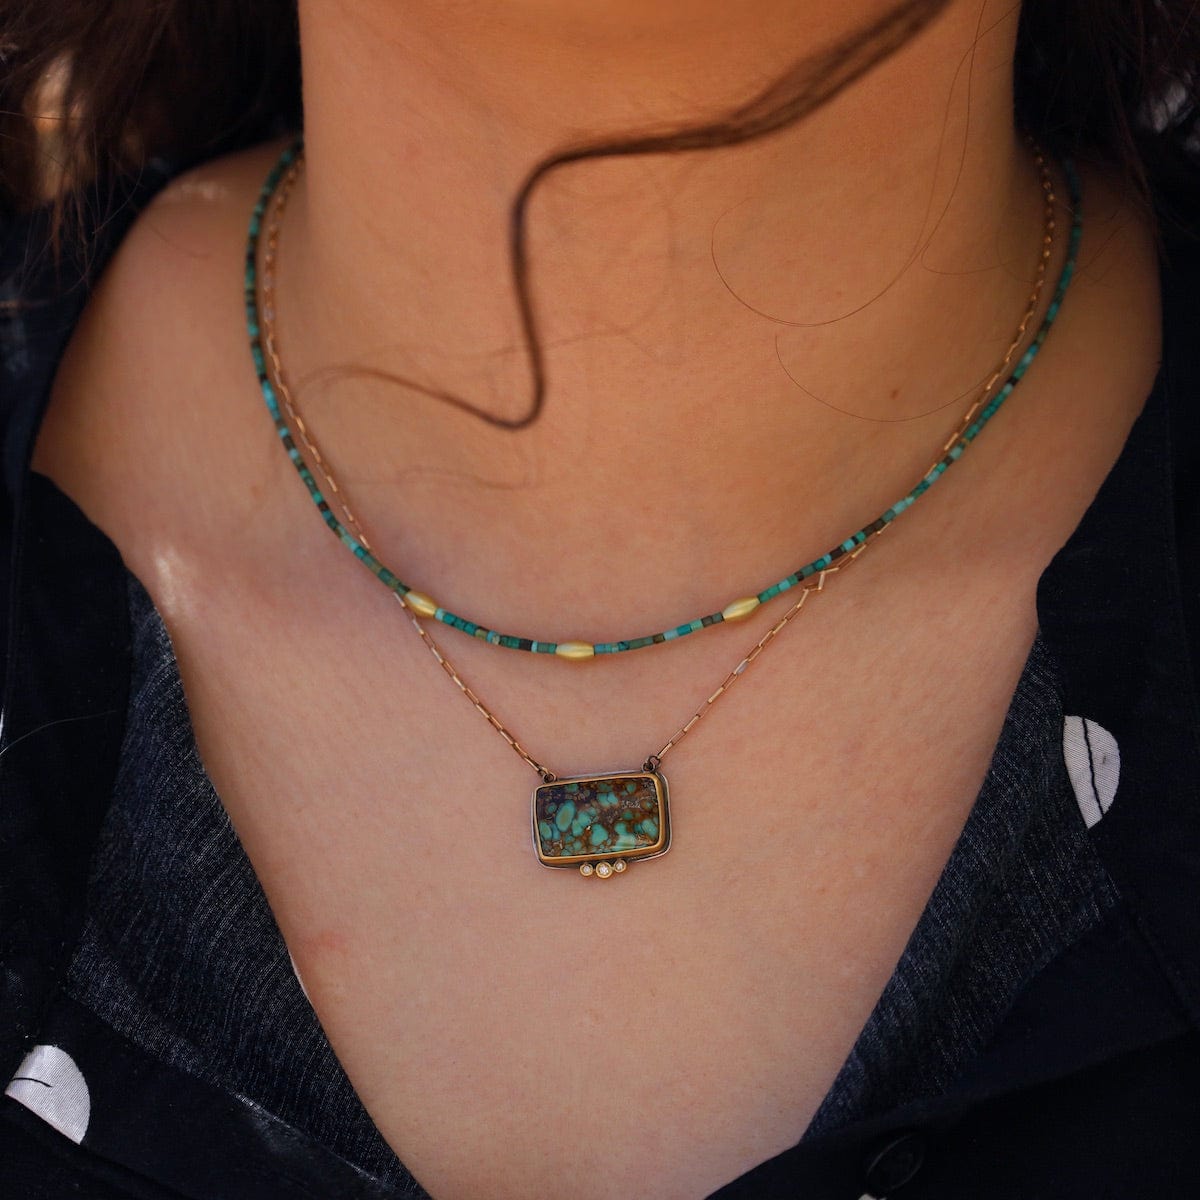 NKL-22K Turquoise & Gold Beaded Necklace